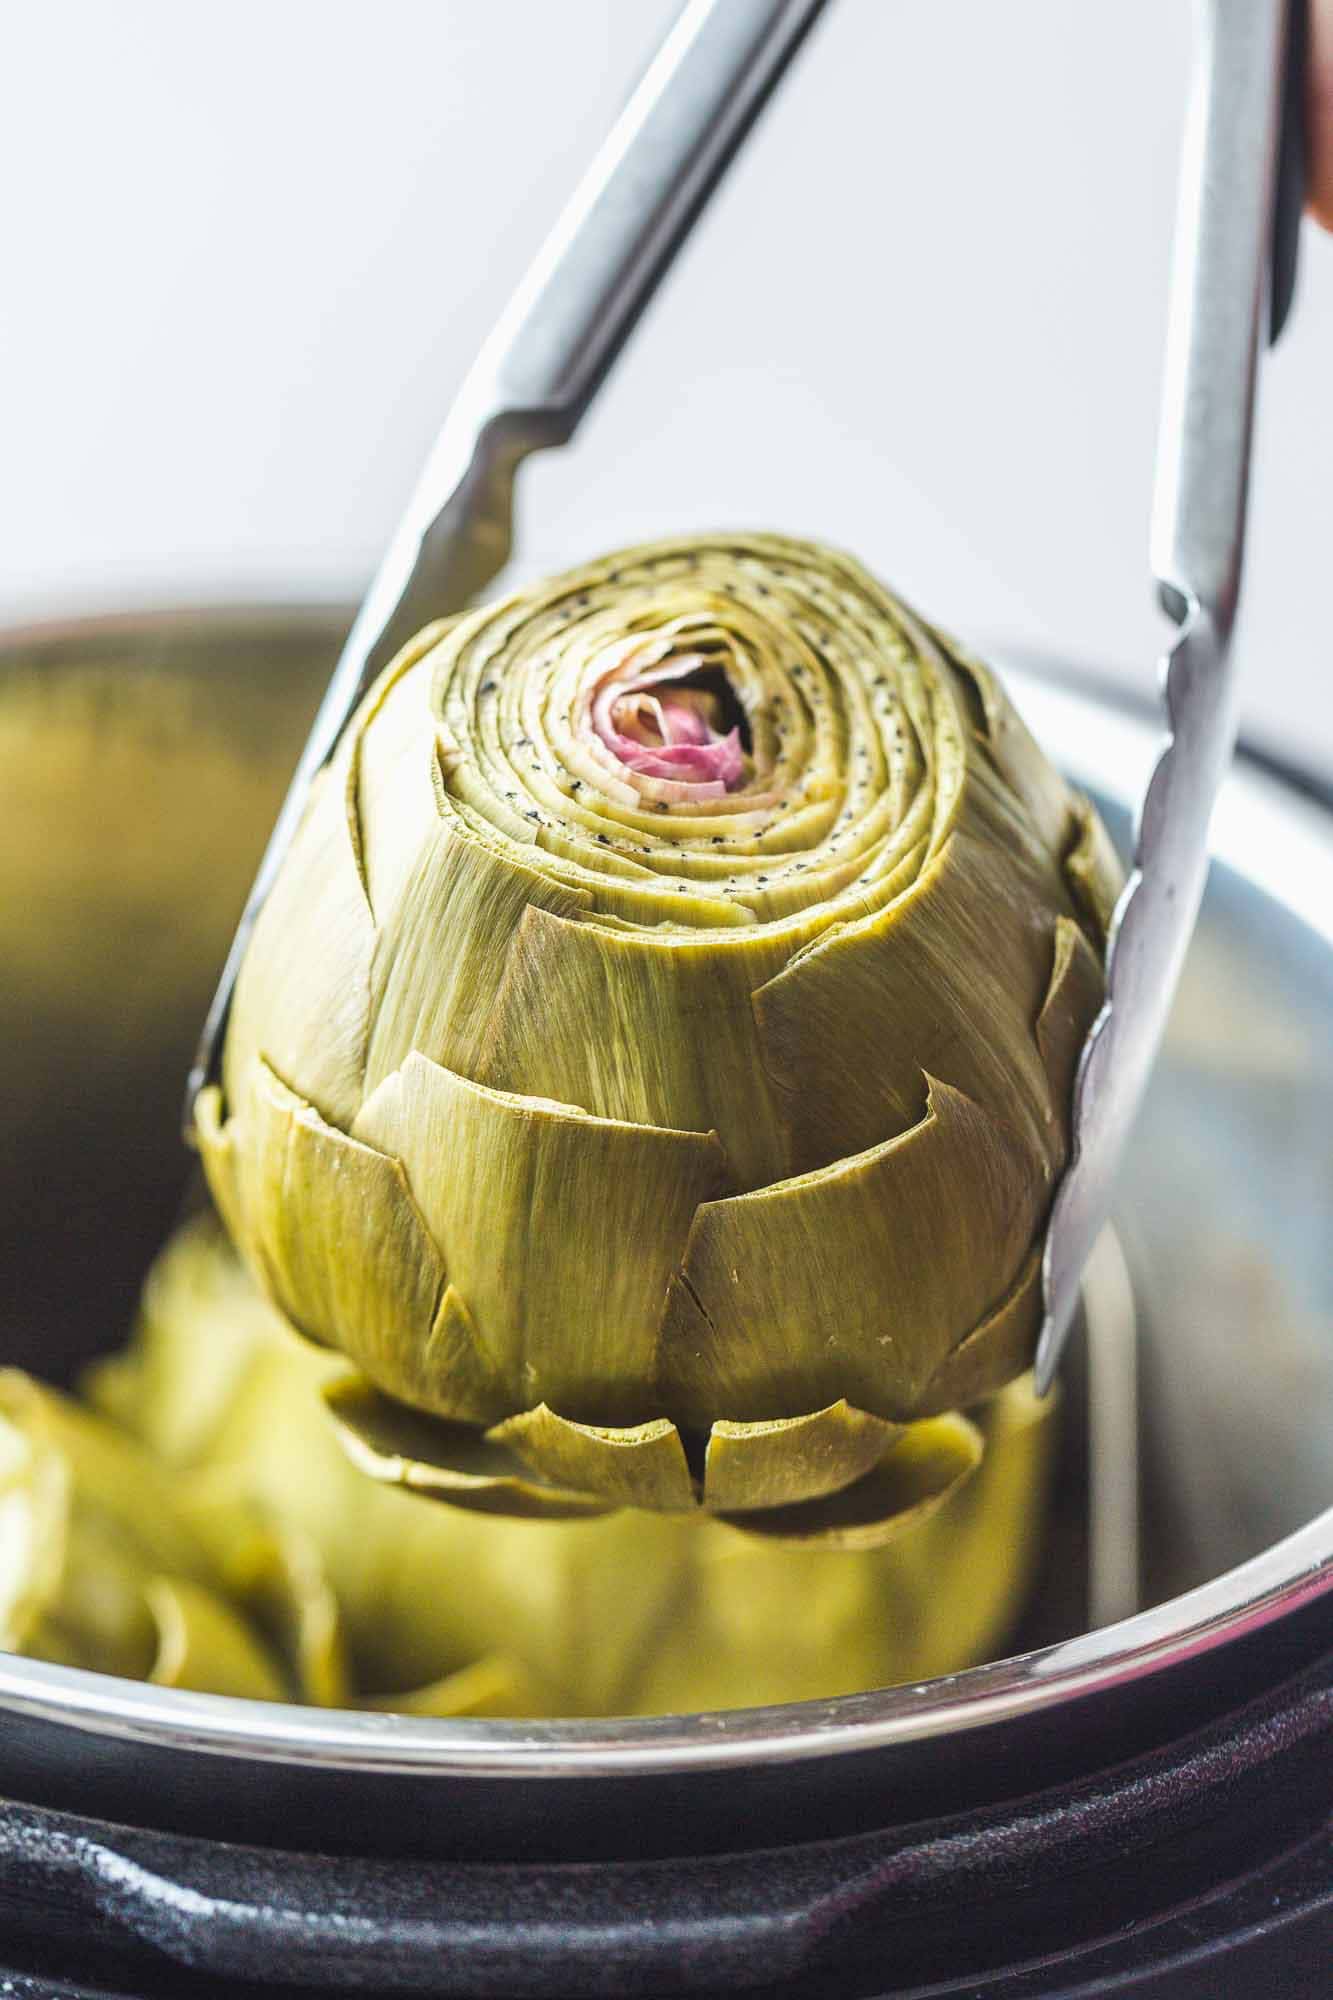 Removing pressure cooked artichokes from the Instant Pot using metal kitchen tongs.